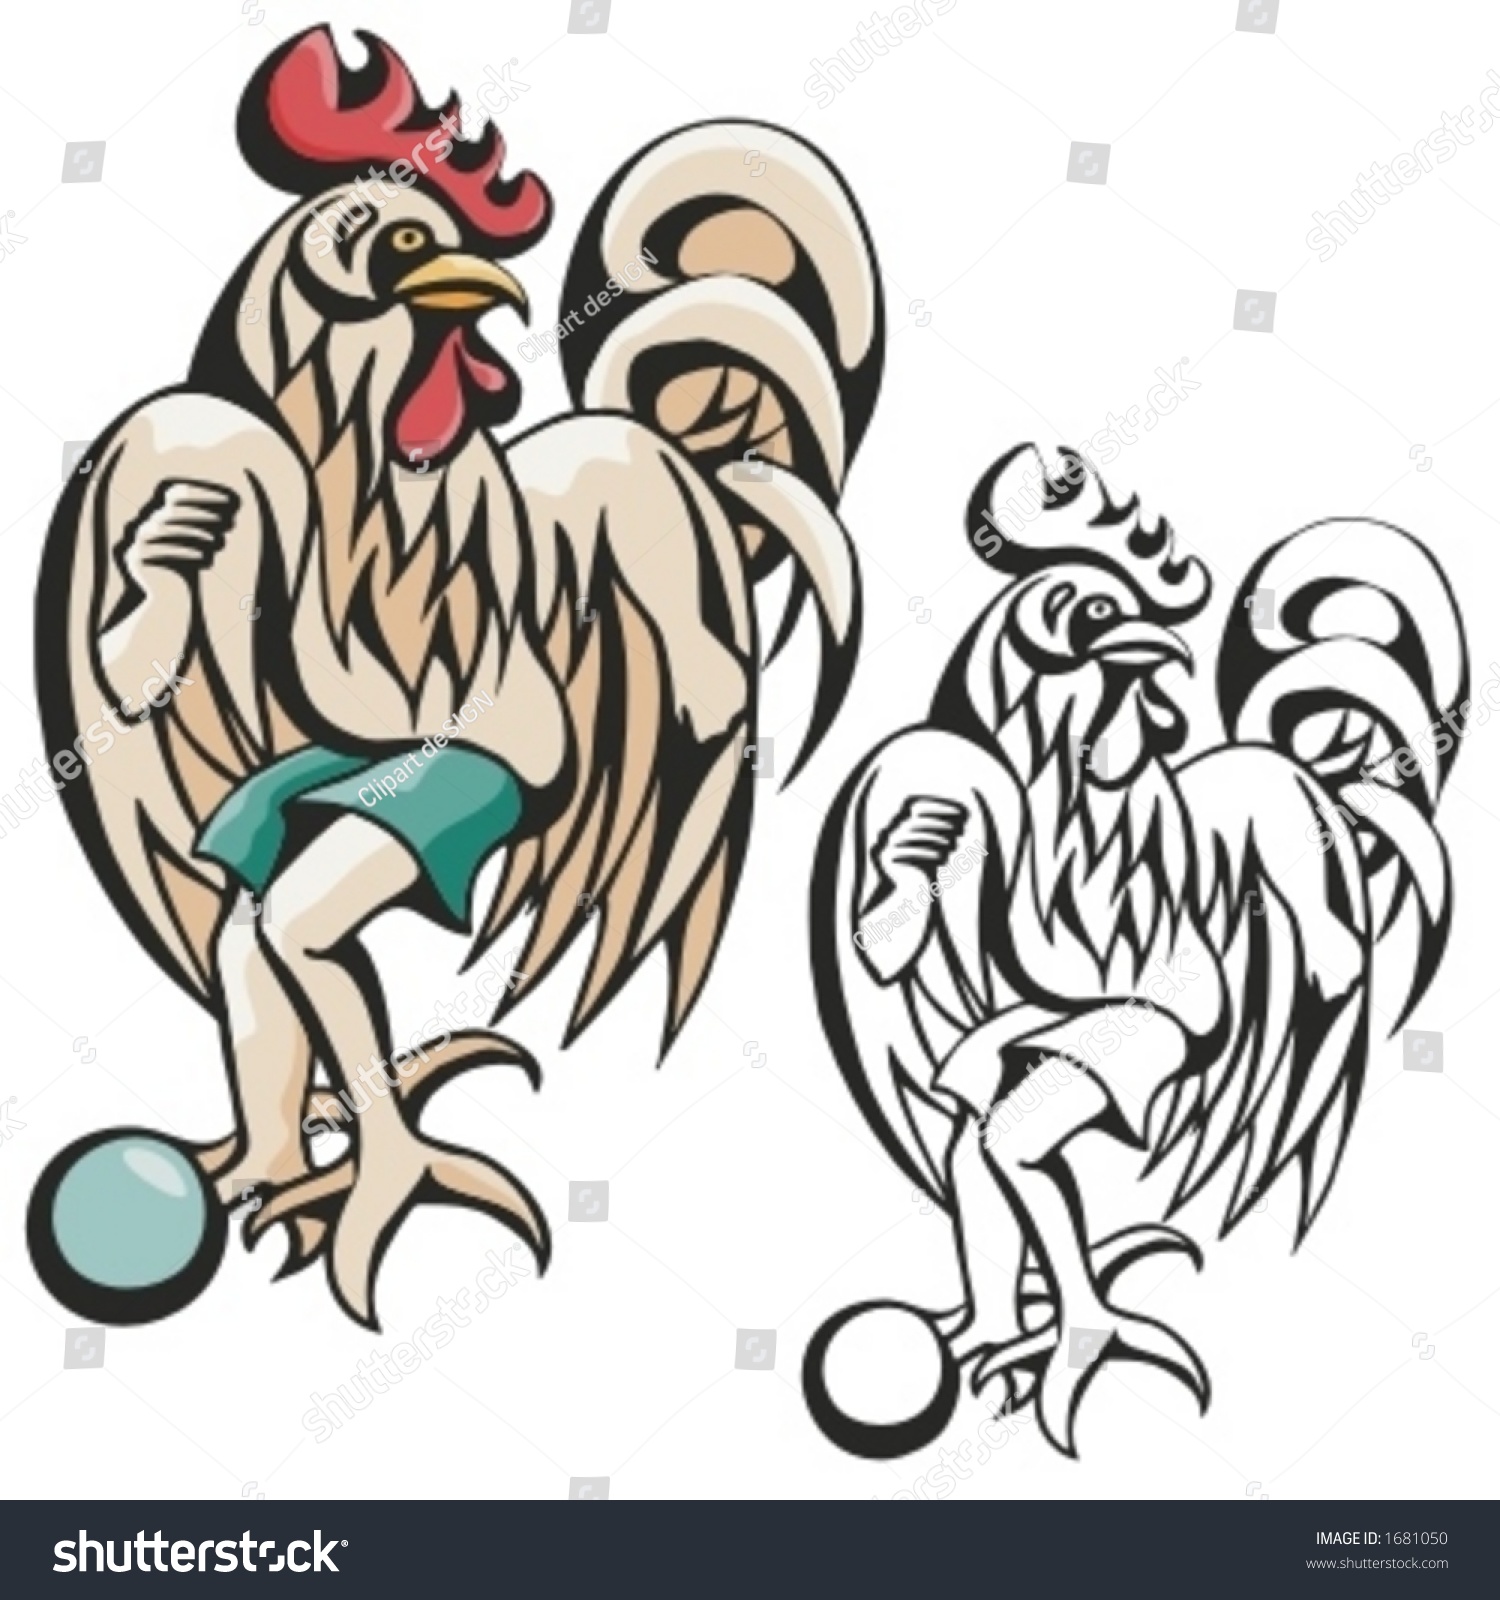 rooster mascot clipart - photo #23